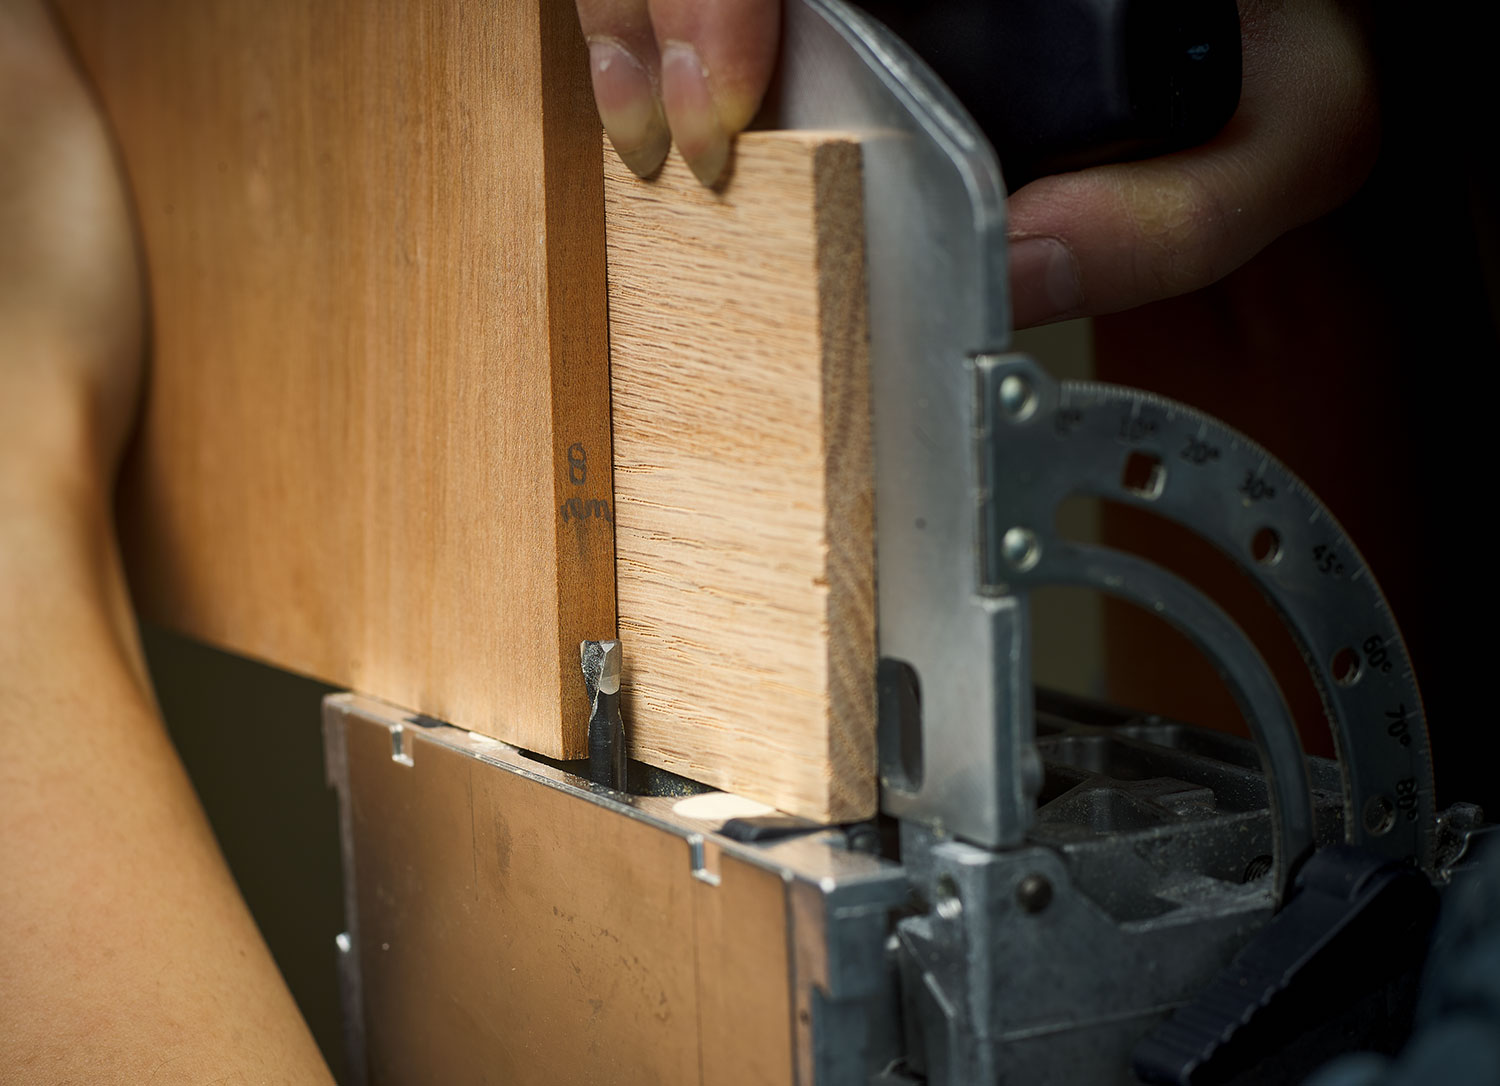 A shim offsets the cutter so it mortises in the center of the stock.